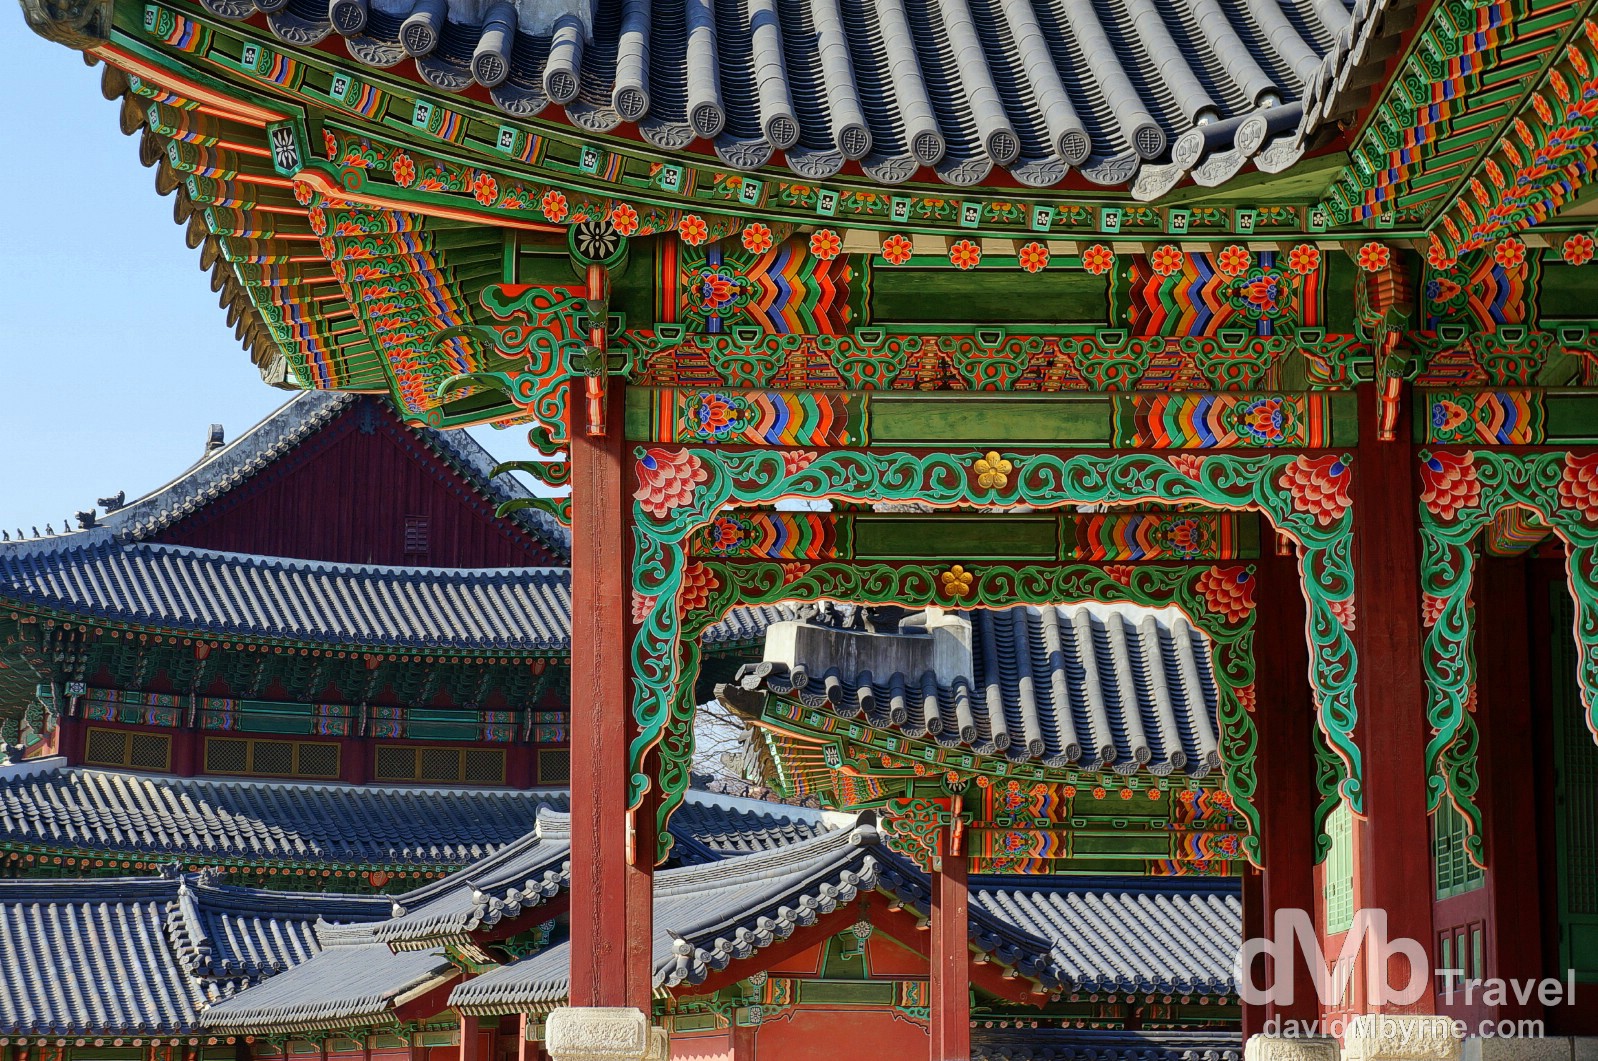 Buildings in the grounds of the UNESCO World Heritage-listed Changdeokgung Palace Complex in Seoul, South Korea. January 18th, 2014.